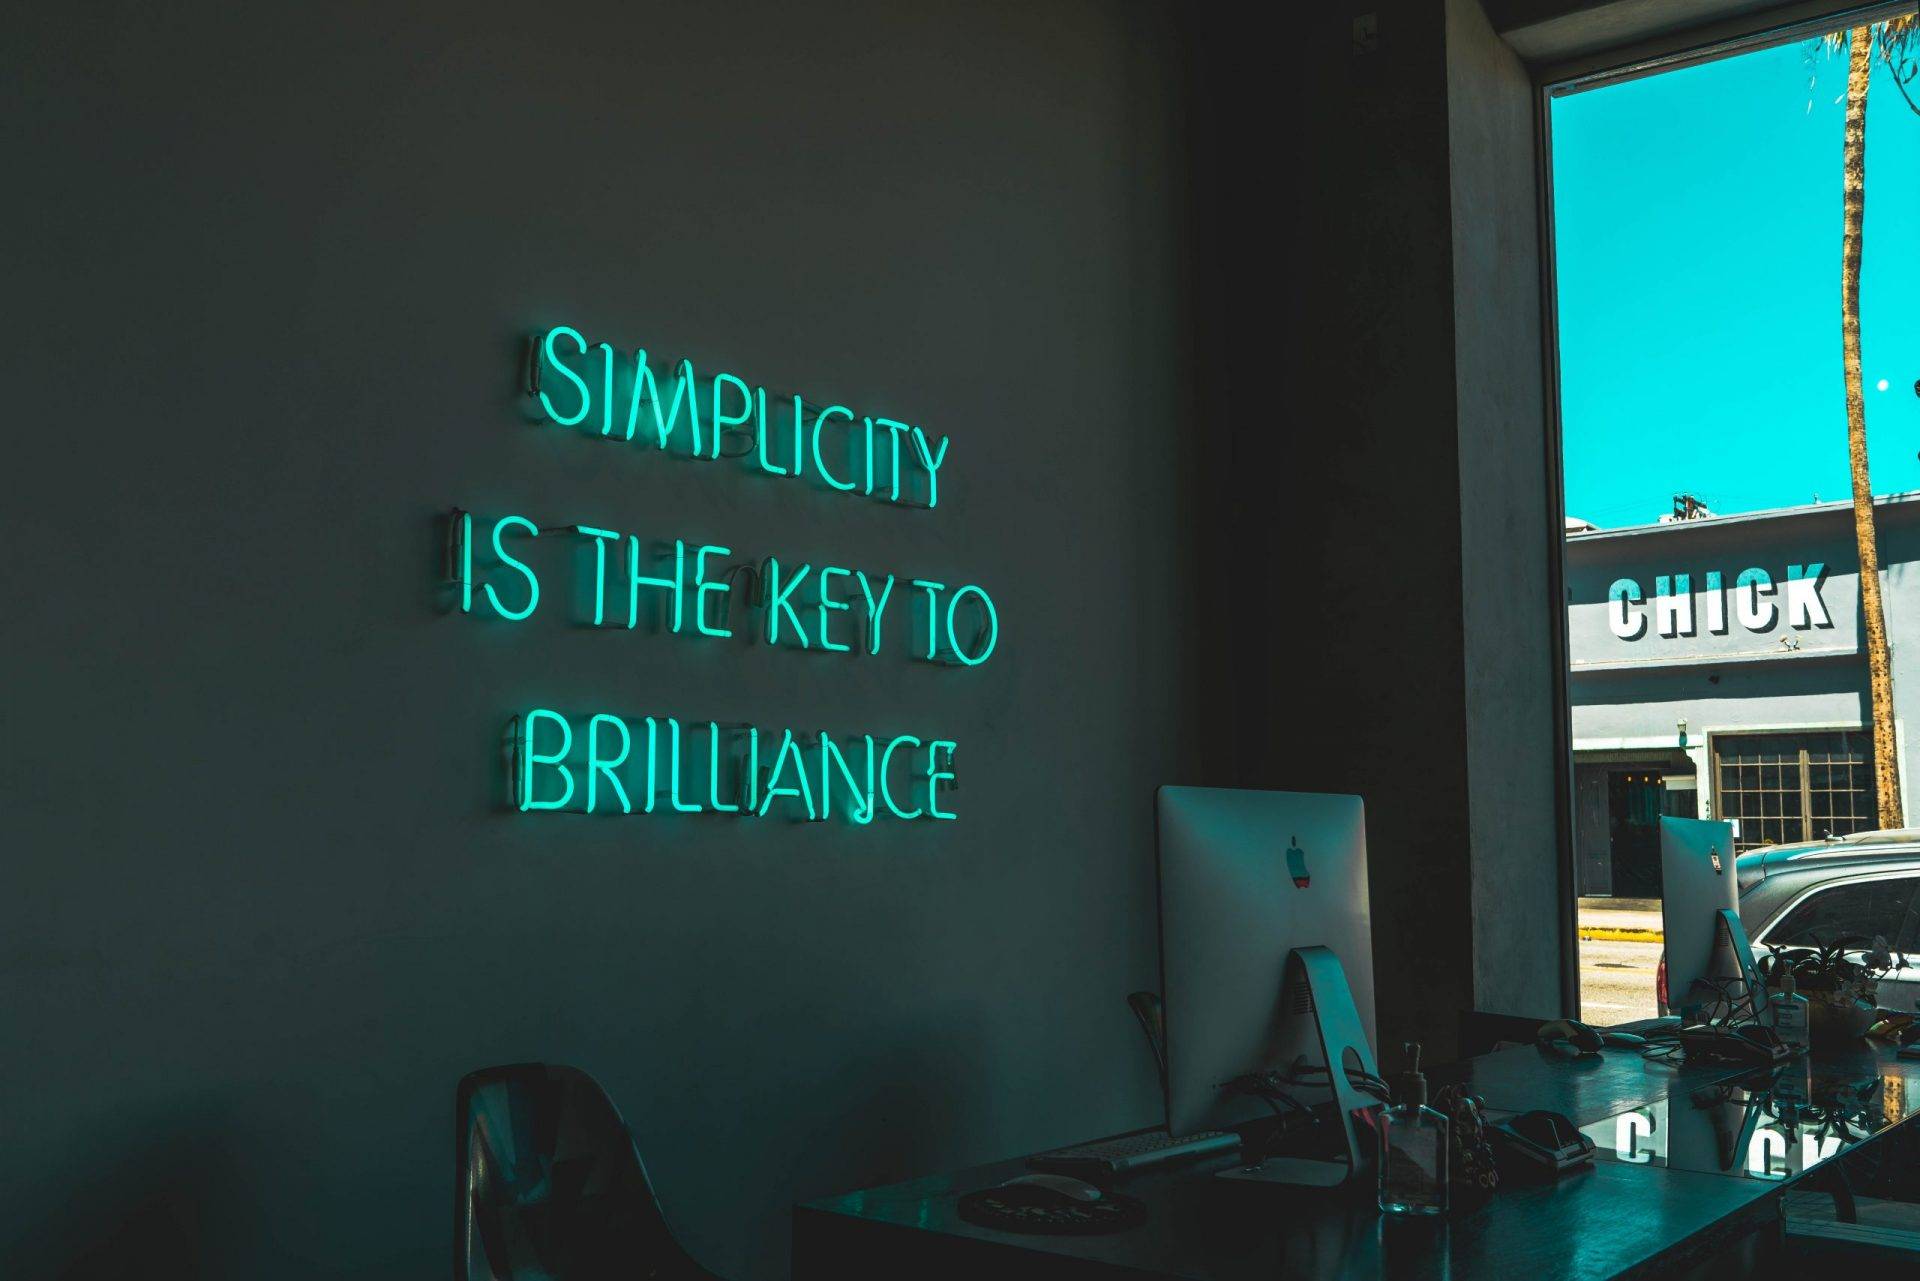 Simplicity is the key to brilliance